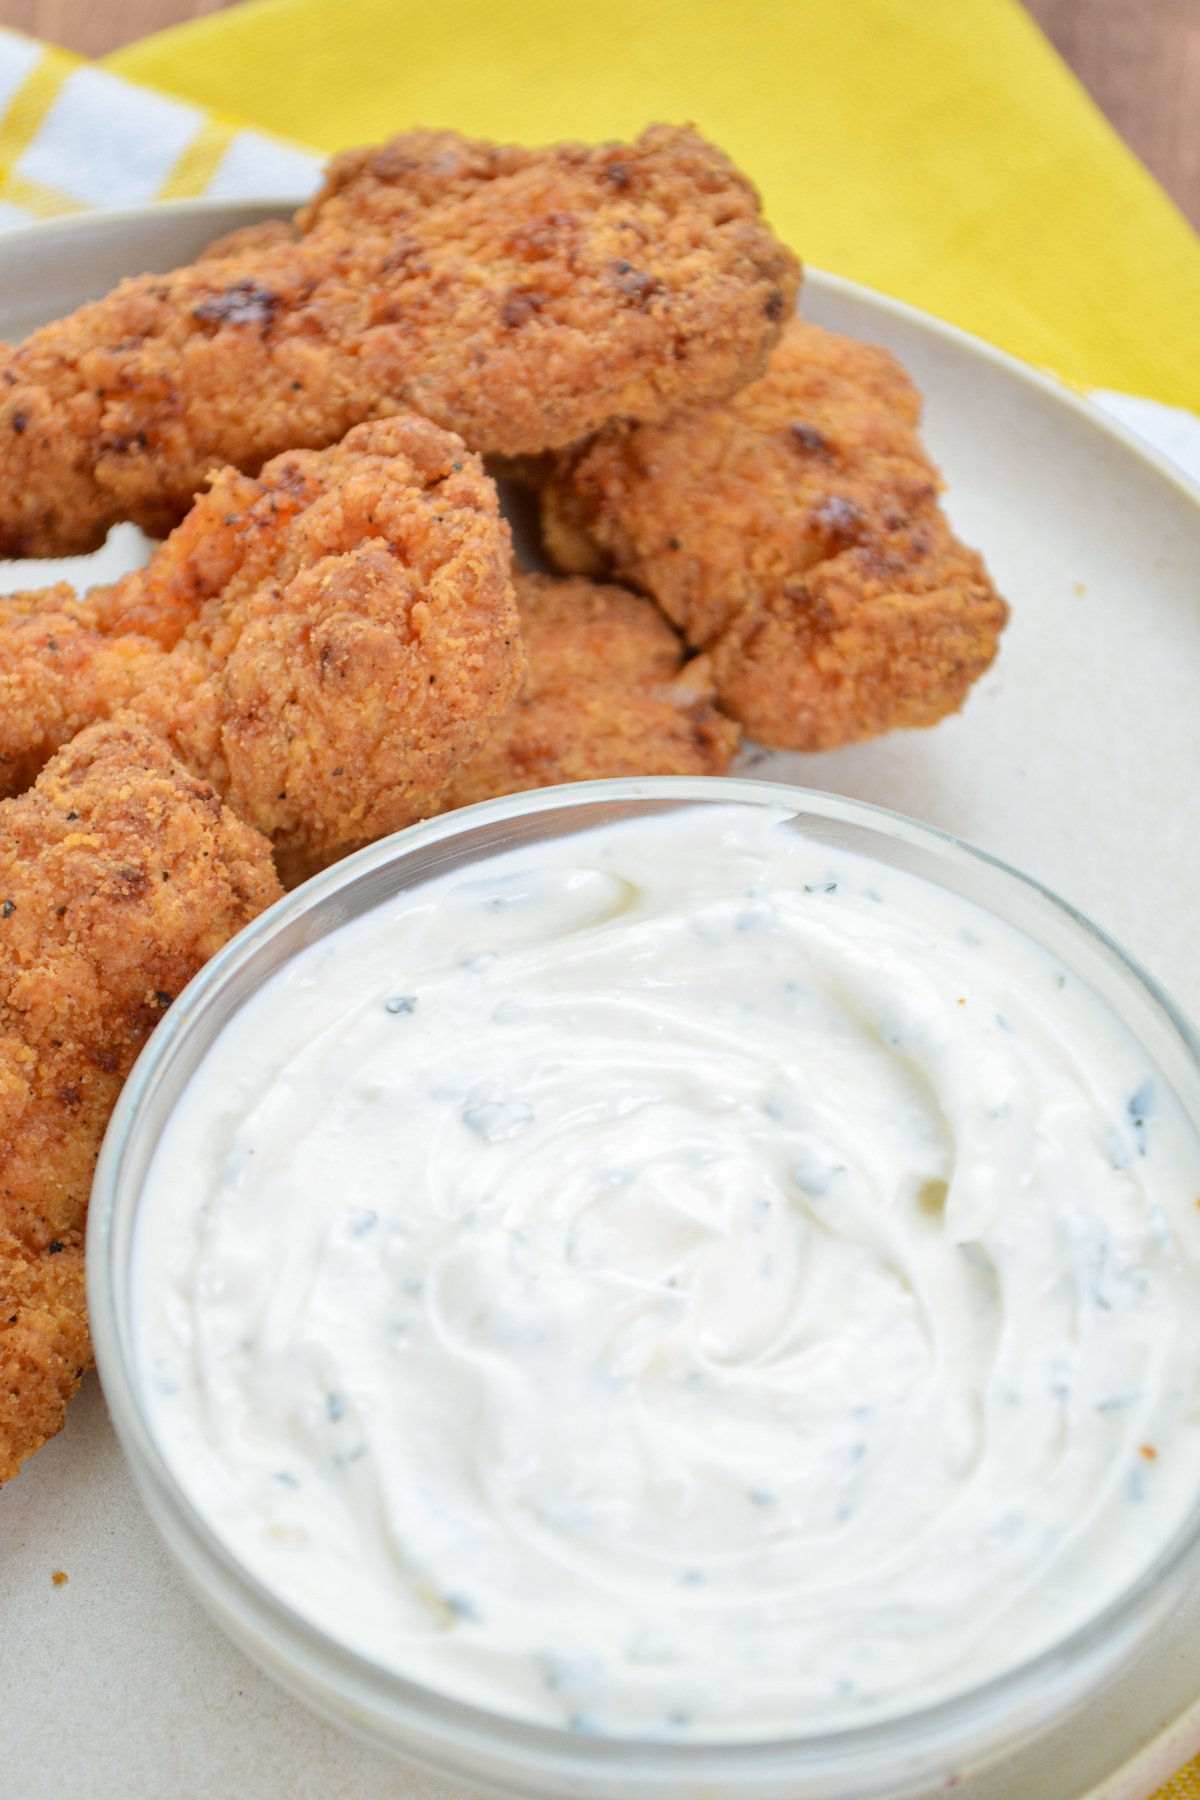 A serving of fried chicken tenders with ranch dip.